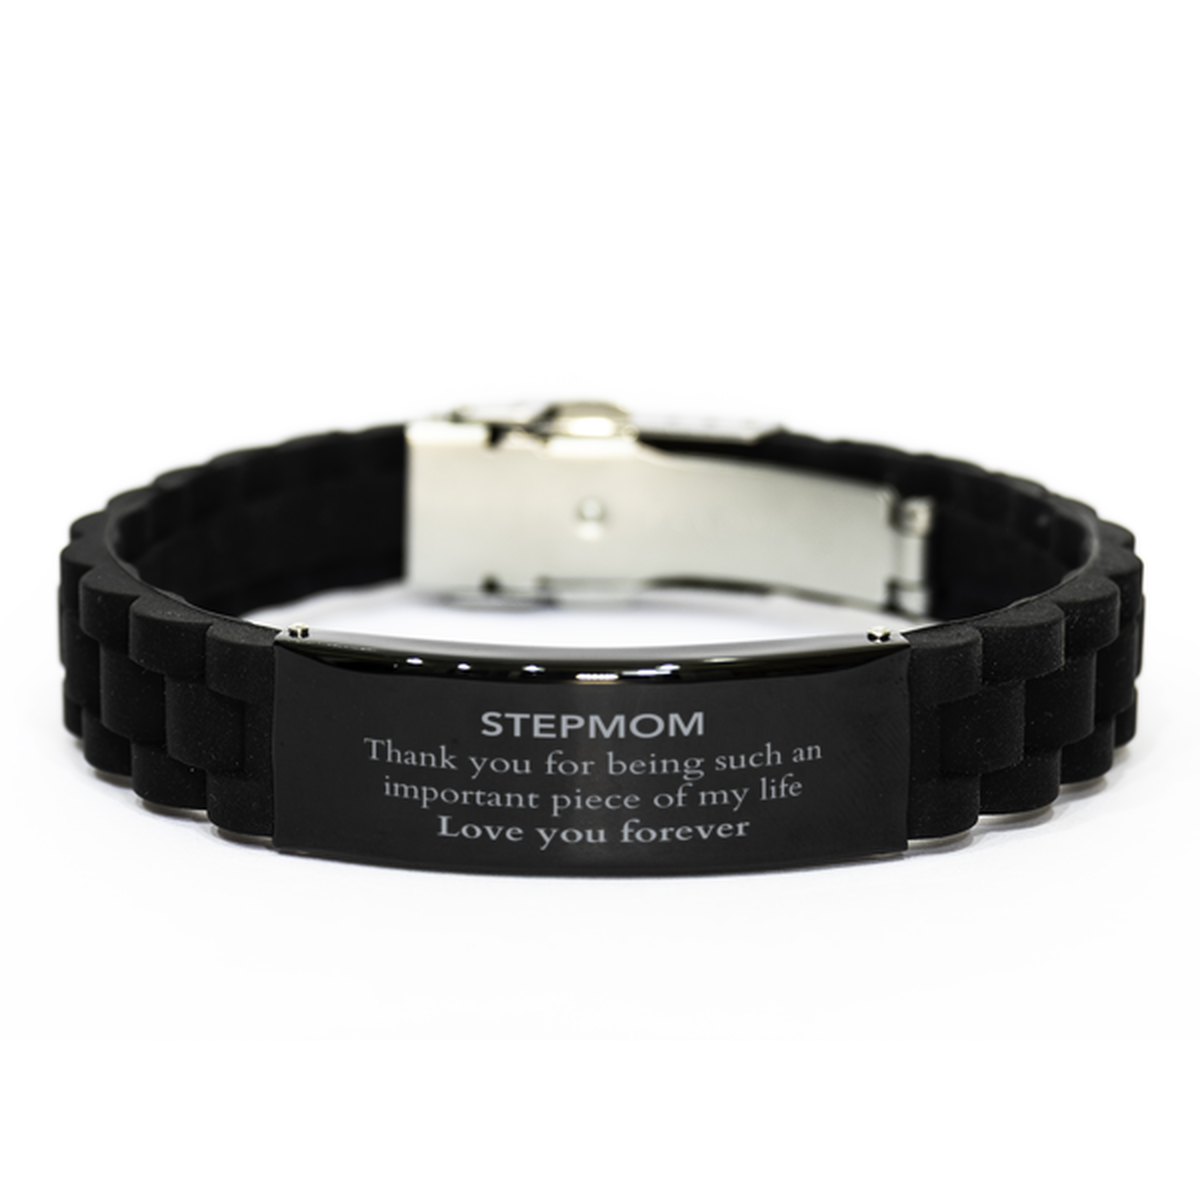 Appropriate Stepmom Black Glidelock Clasp Bracelet Epic Birthday Gifts for Stepmom Thank you for being such an important piece of my life Stepmom Christmas Mothers Fathers Day